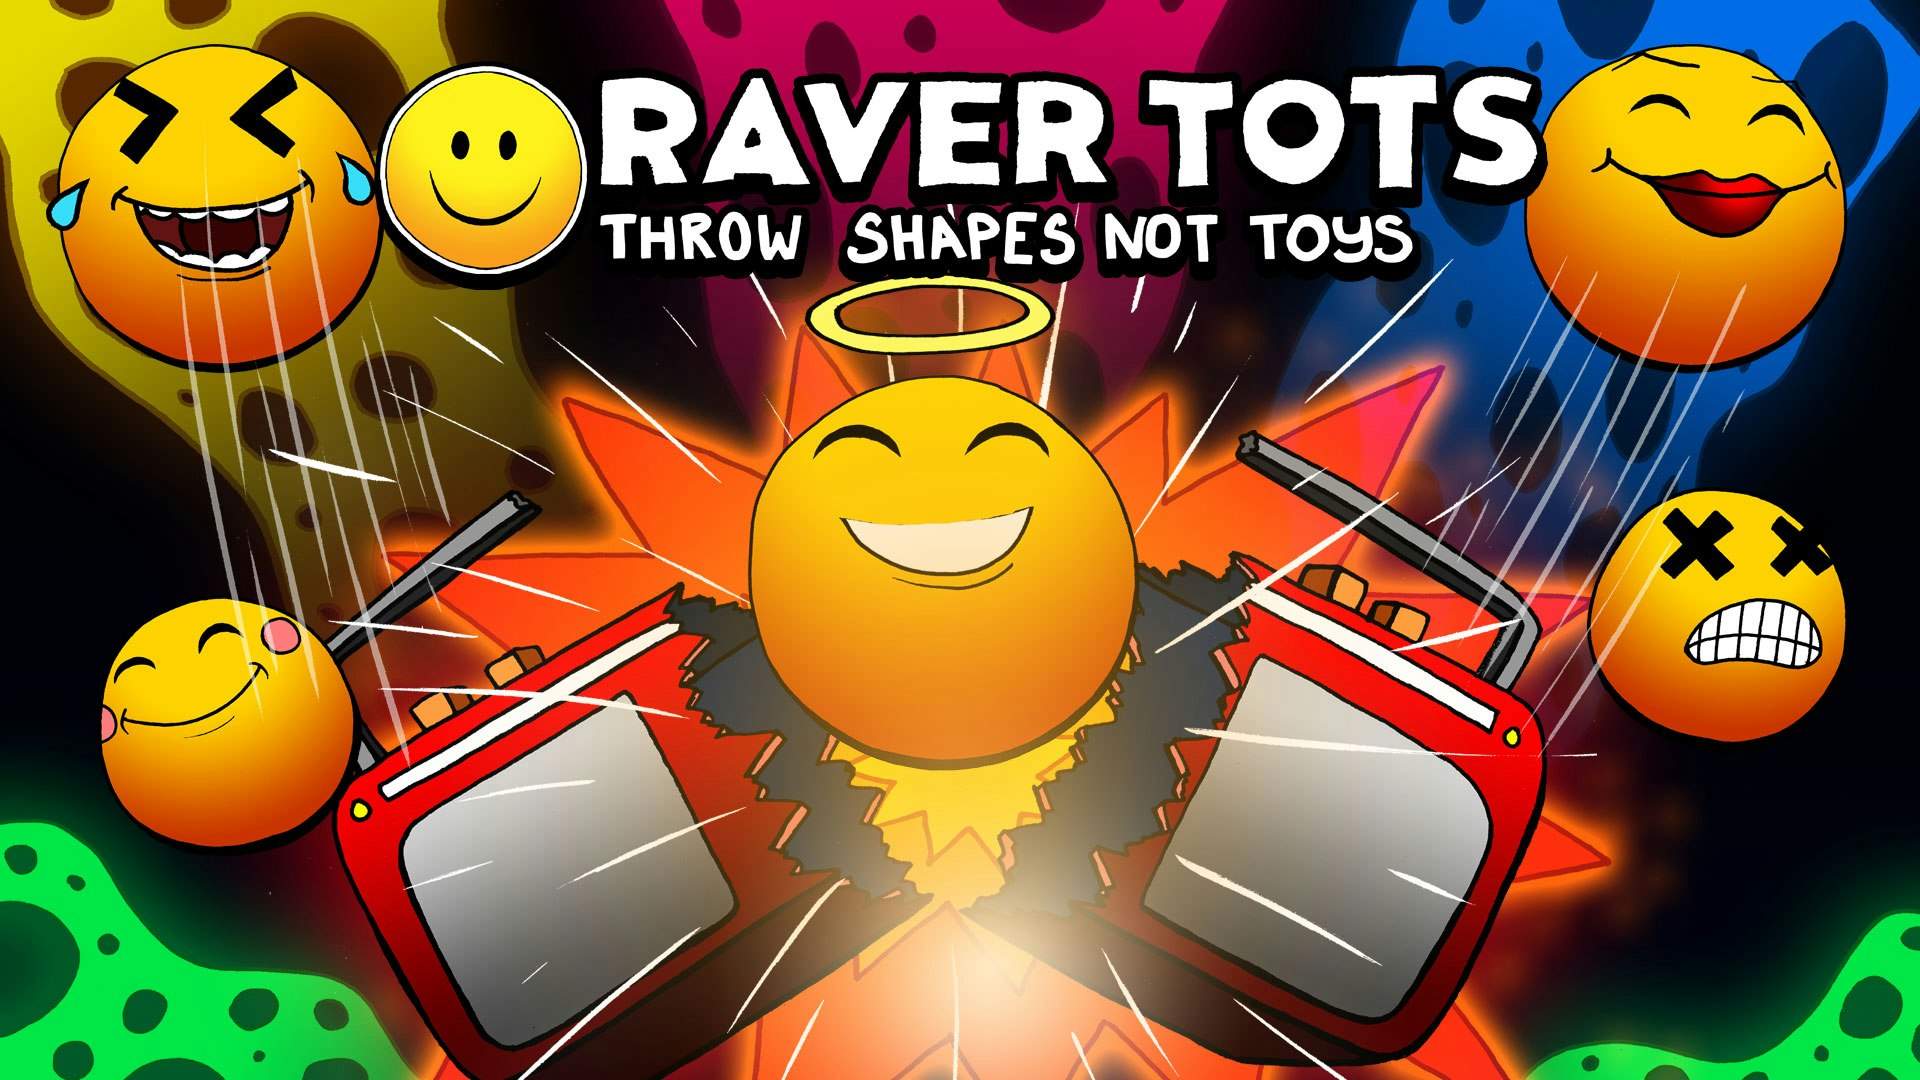 Raver Tots New Years Eve – Manchester